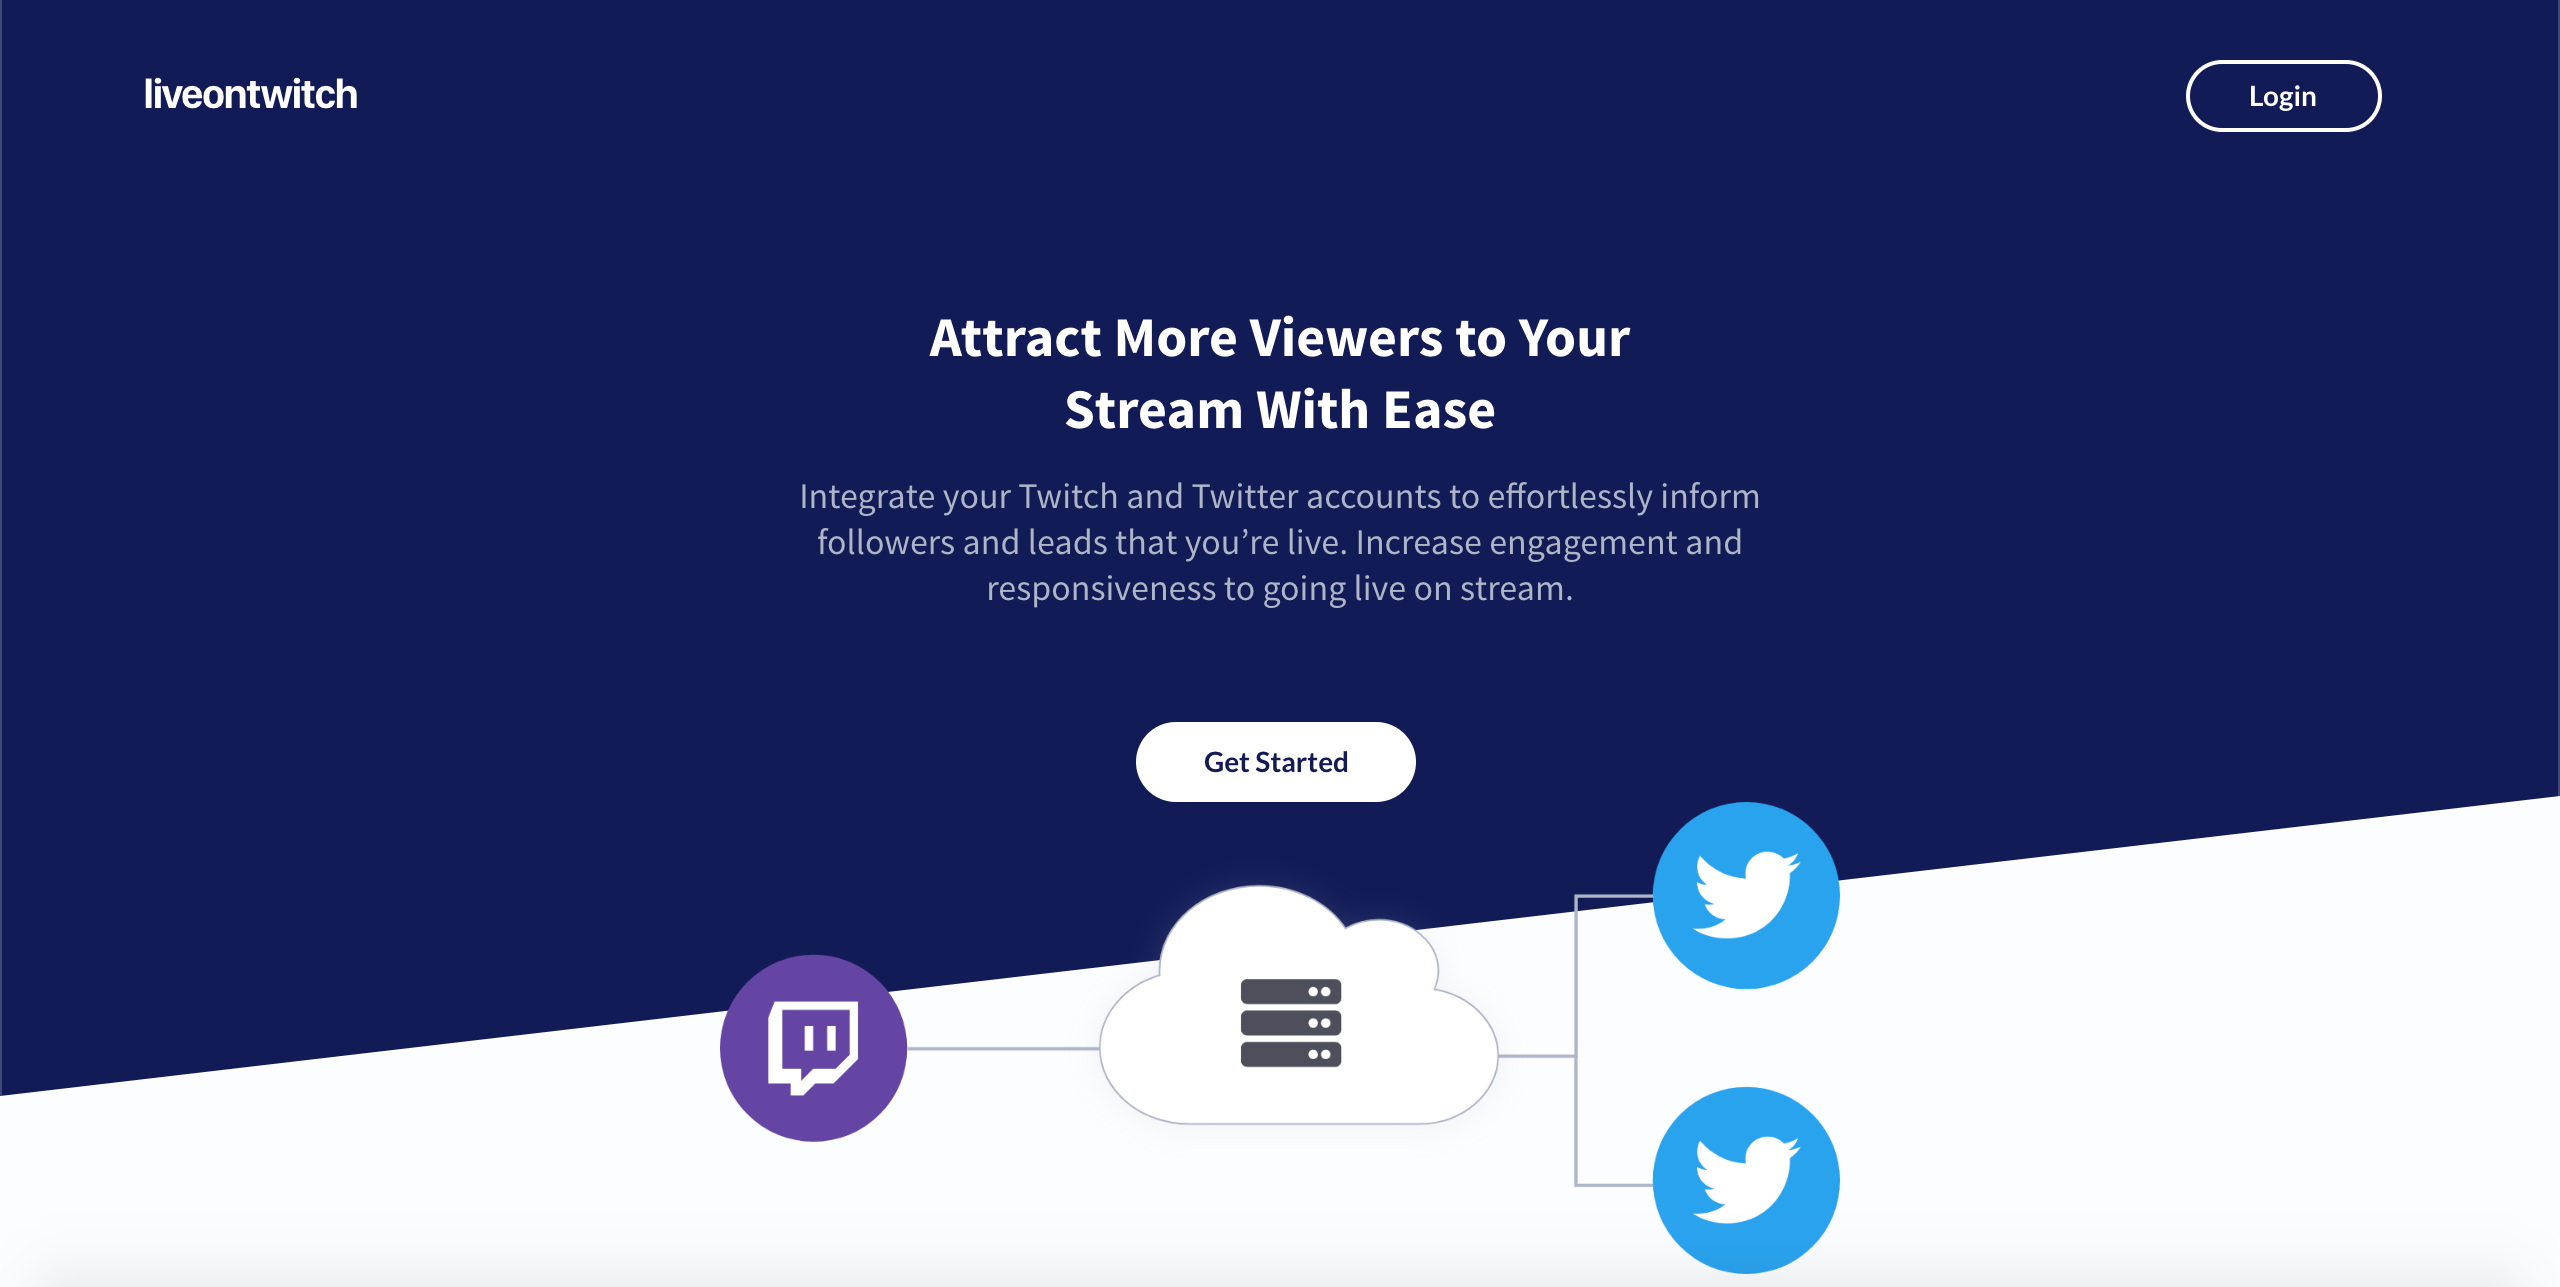 Service which automatically updates a user's Twitter Username and or Bio when they’re live on Twitch through the use of Twitch API and Webhooks. Built with a Django REST based backend and a React Frontend, it uses Oauth2 Twitch and Twitter authentication for login. 

Both Staging and Production servers hosted on DigitalOcean, with Production server running on a Kubernetes Cluster. The production deployment pipeline utilizes CirleCI for Continuous Integration and Deployment by pulling the master git branch, rebuilding the docker images and deploying to managed Kubernetes. The containers within the Cluster include Django, Celery, Nginx, Redis, PostgreSQL.